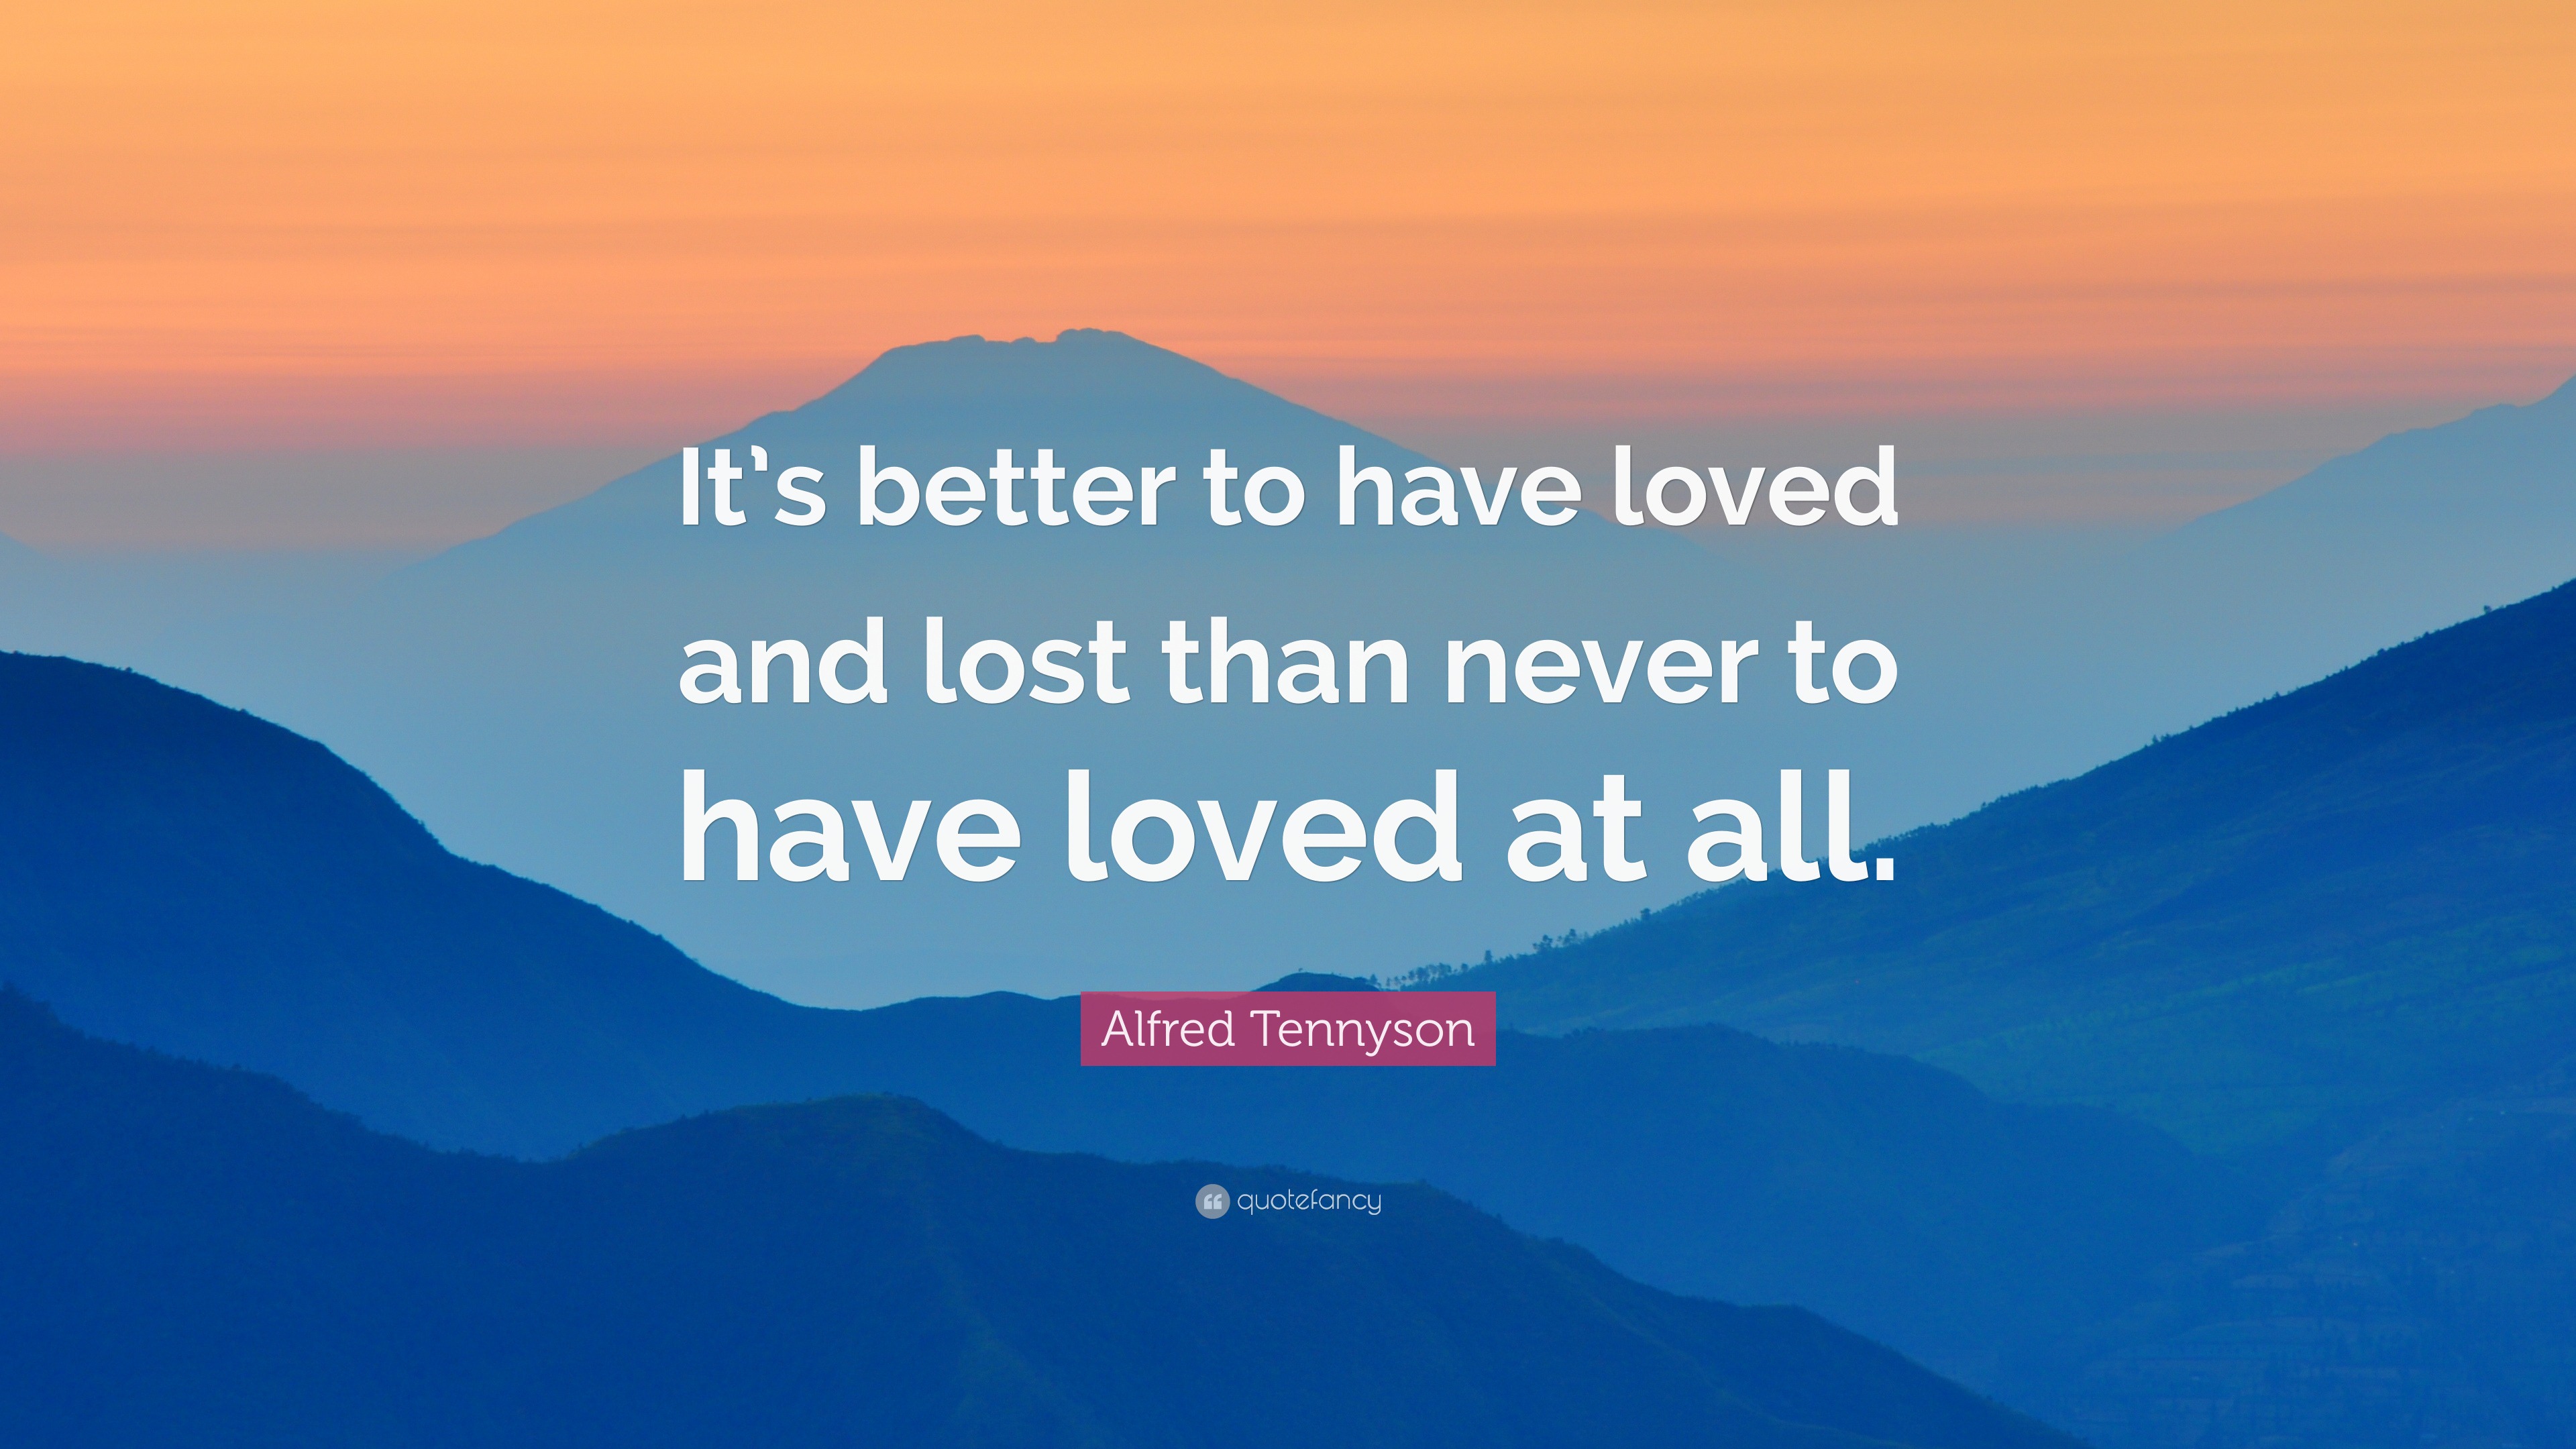 Alfred Tennyson Quote “its Better To Have Loved And Lost Than Never To Have Loved At All” 16